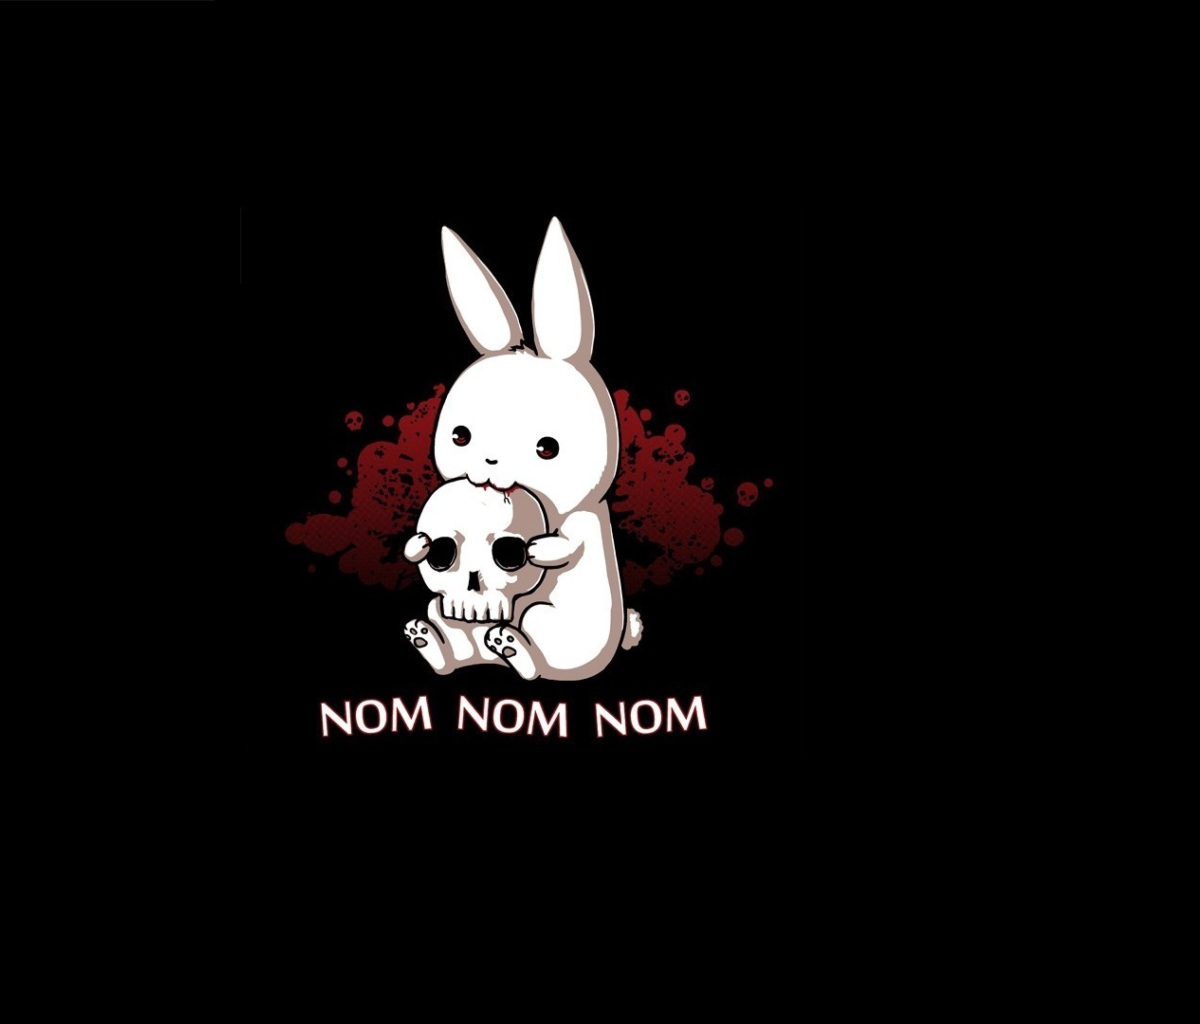 Blood-Thirsty Hare wallpaper 1200x1024